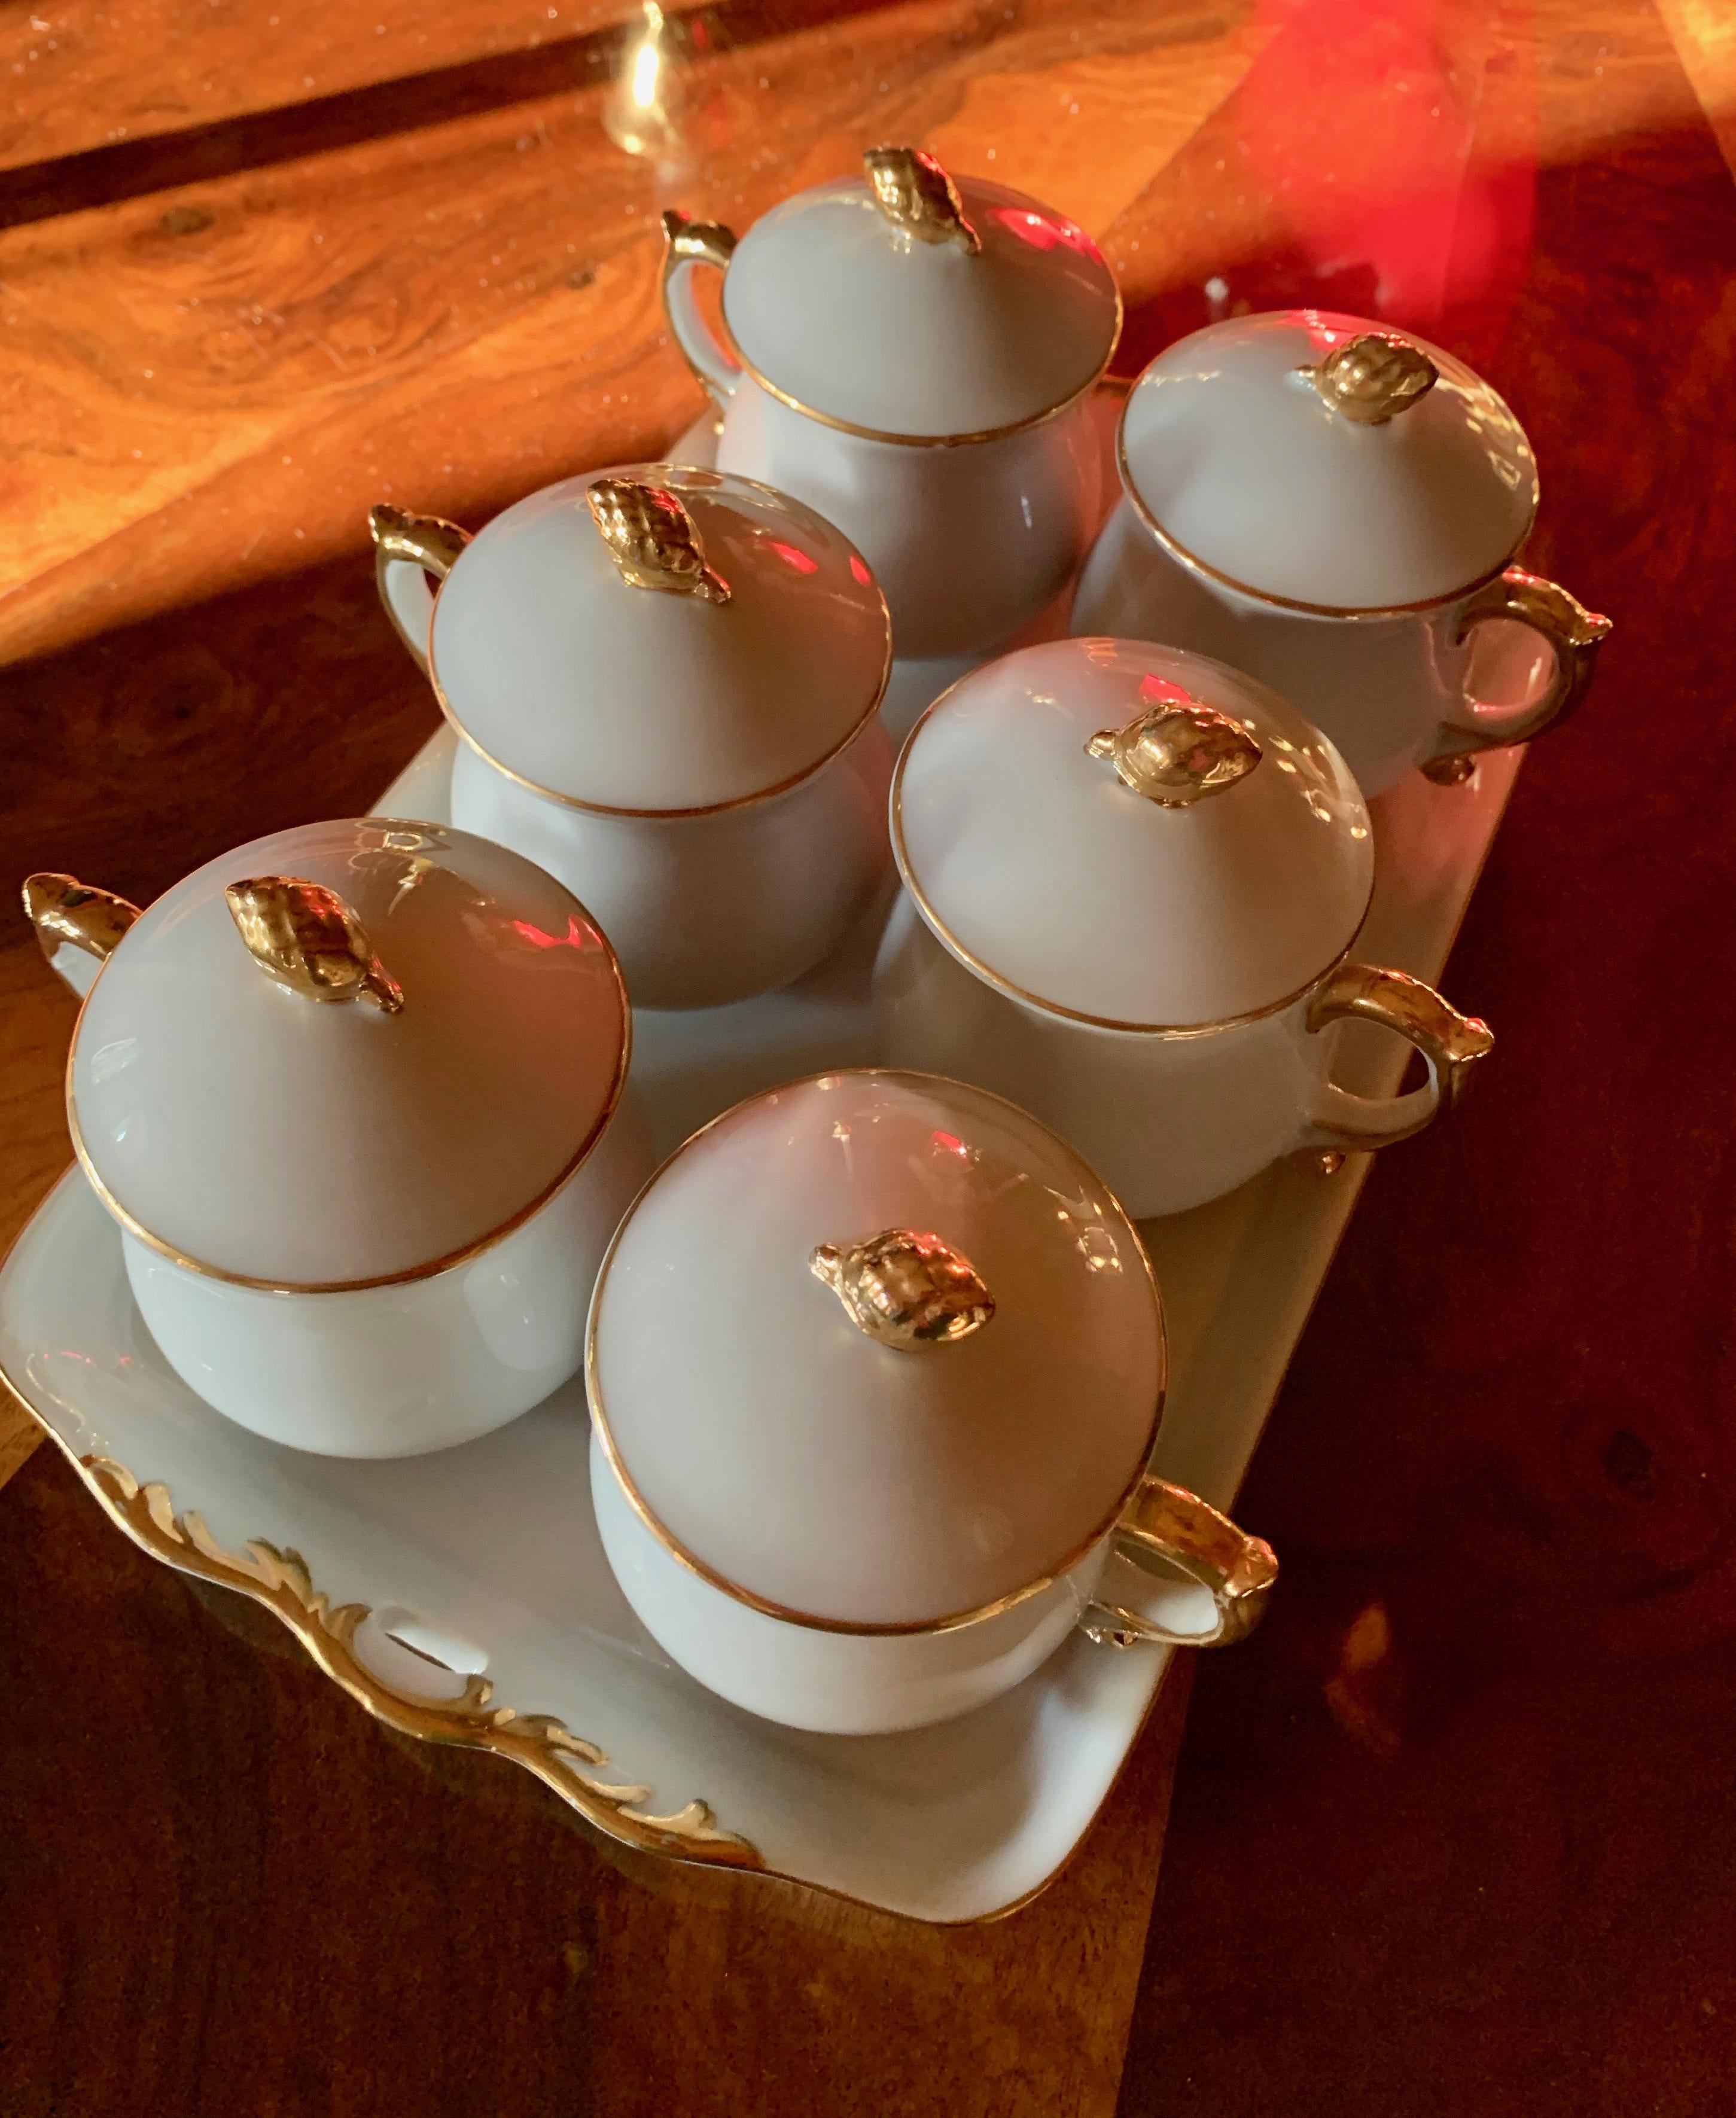 Set of 6 French pot de creme porcelain containers with hand painted gold acorn handle, a lovely set of containers for the sophisticated dessert! See our recipe attached.
Be the hit of your dinner party serving your after dinner liqueur with our